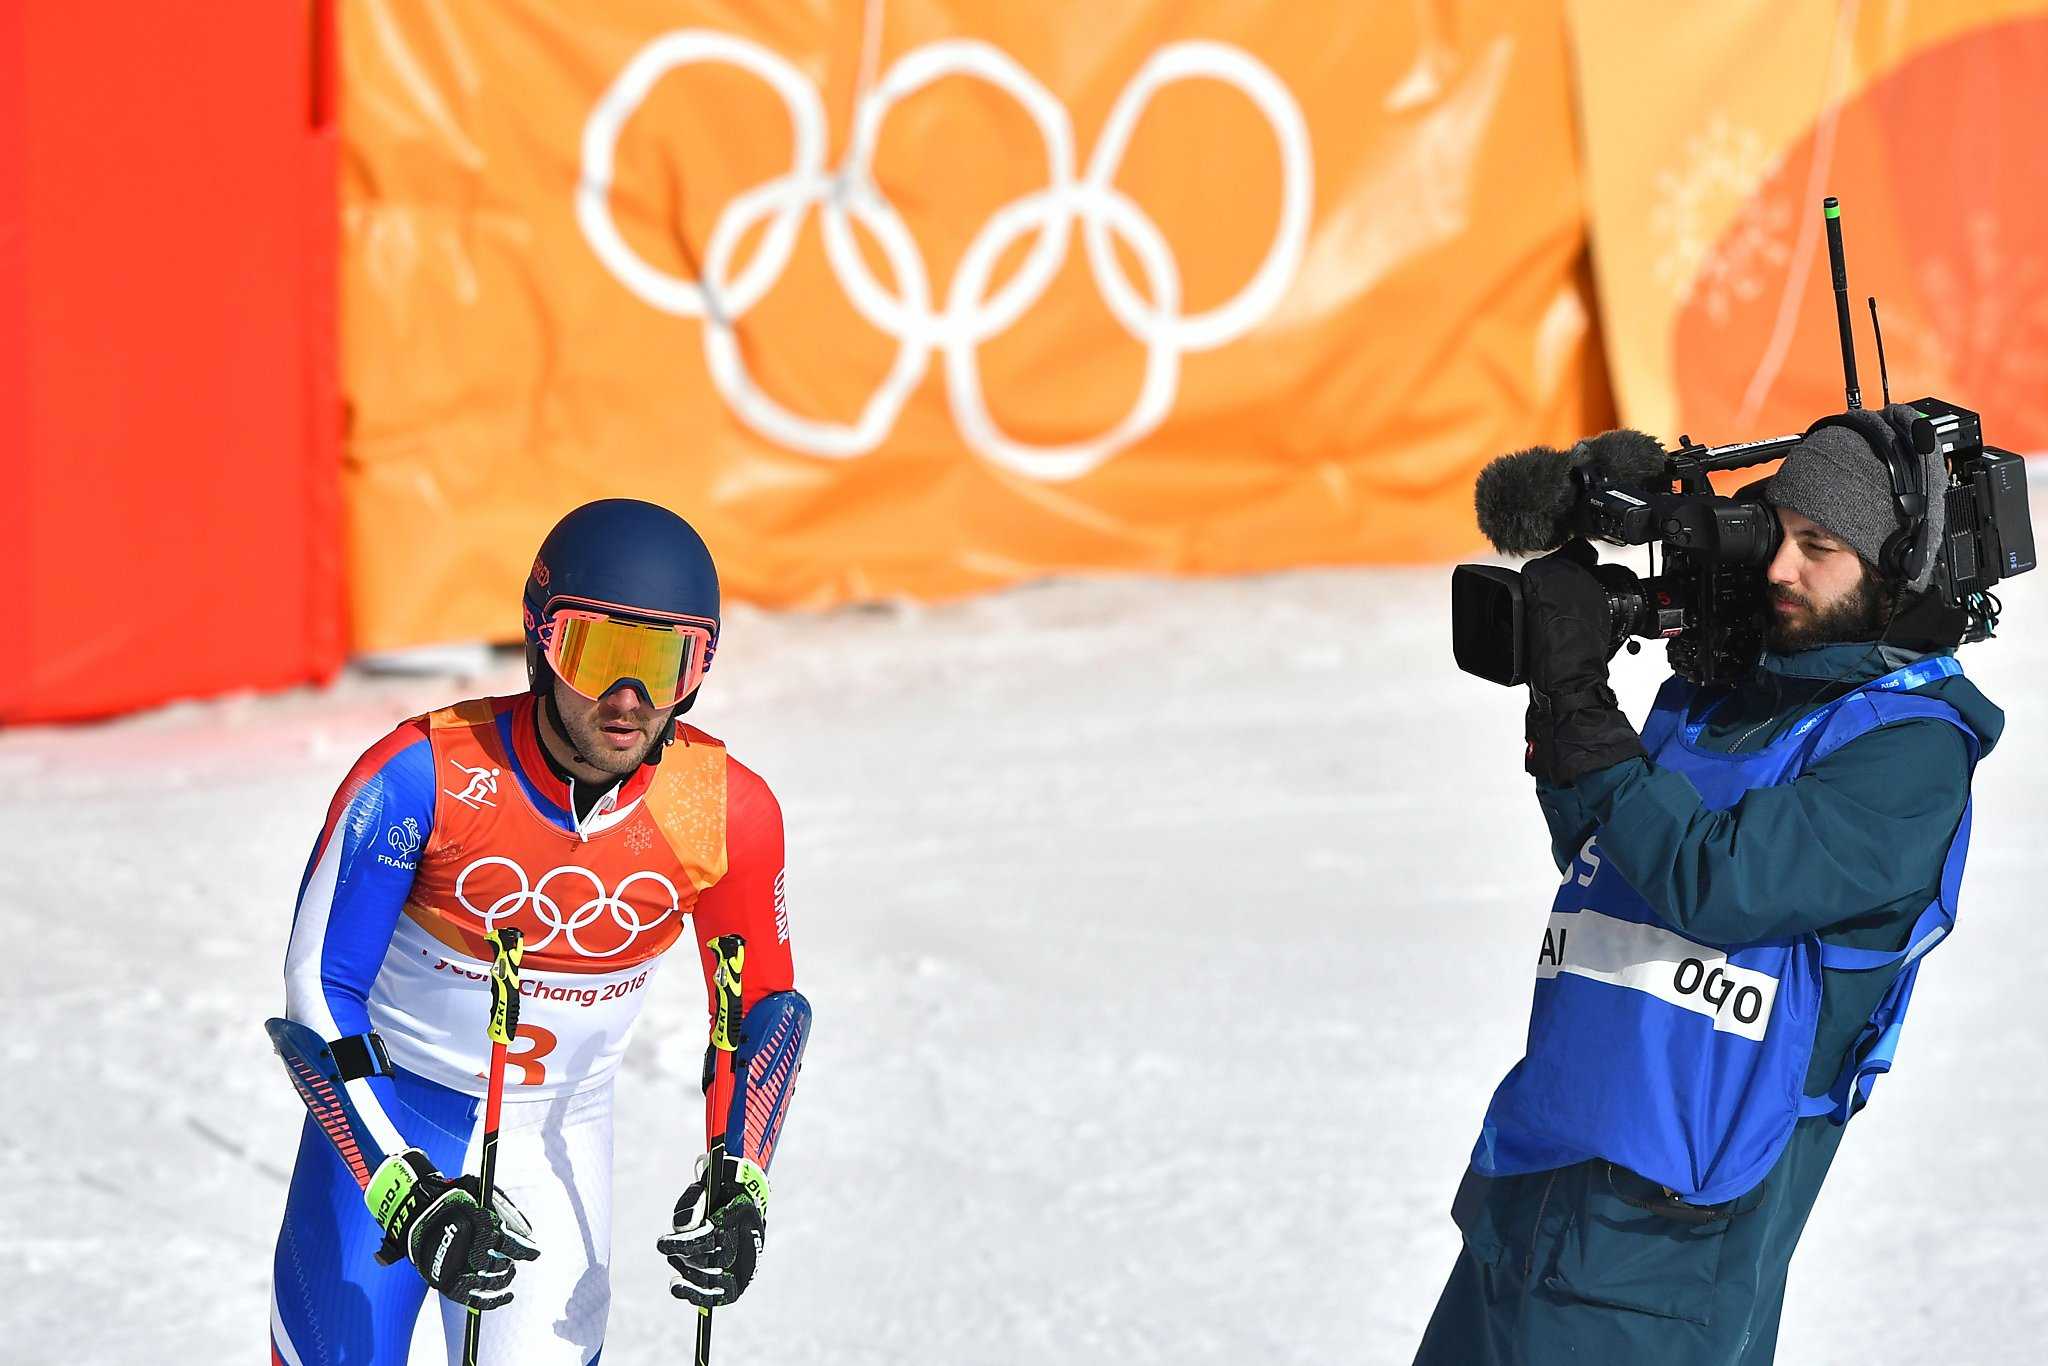 French Olympic skier sent home for poor sportsmanship